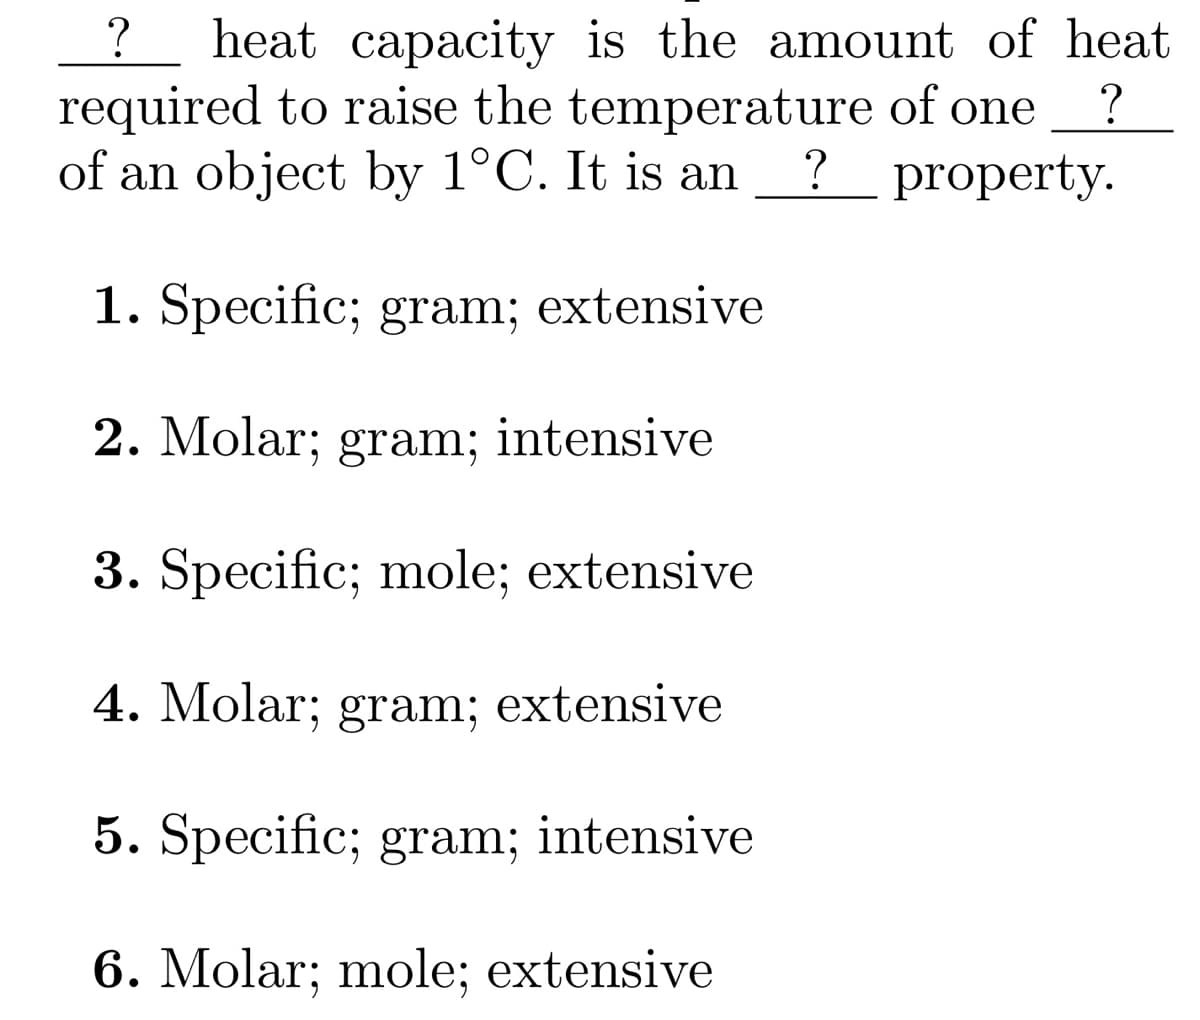 ?
heat capacity is the amount of heat
required to raise the temperature of one ?
of an object by 1°C. It is an ? property.
1. Specific; gram; extensive
2. Molar; gram; intensive
3. Specific; mole; extensive
4. Molar; gram; extensive
5. Specific; gram; intensive
6. Molar; mole; extensive